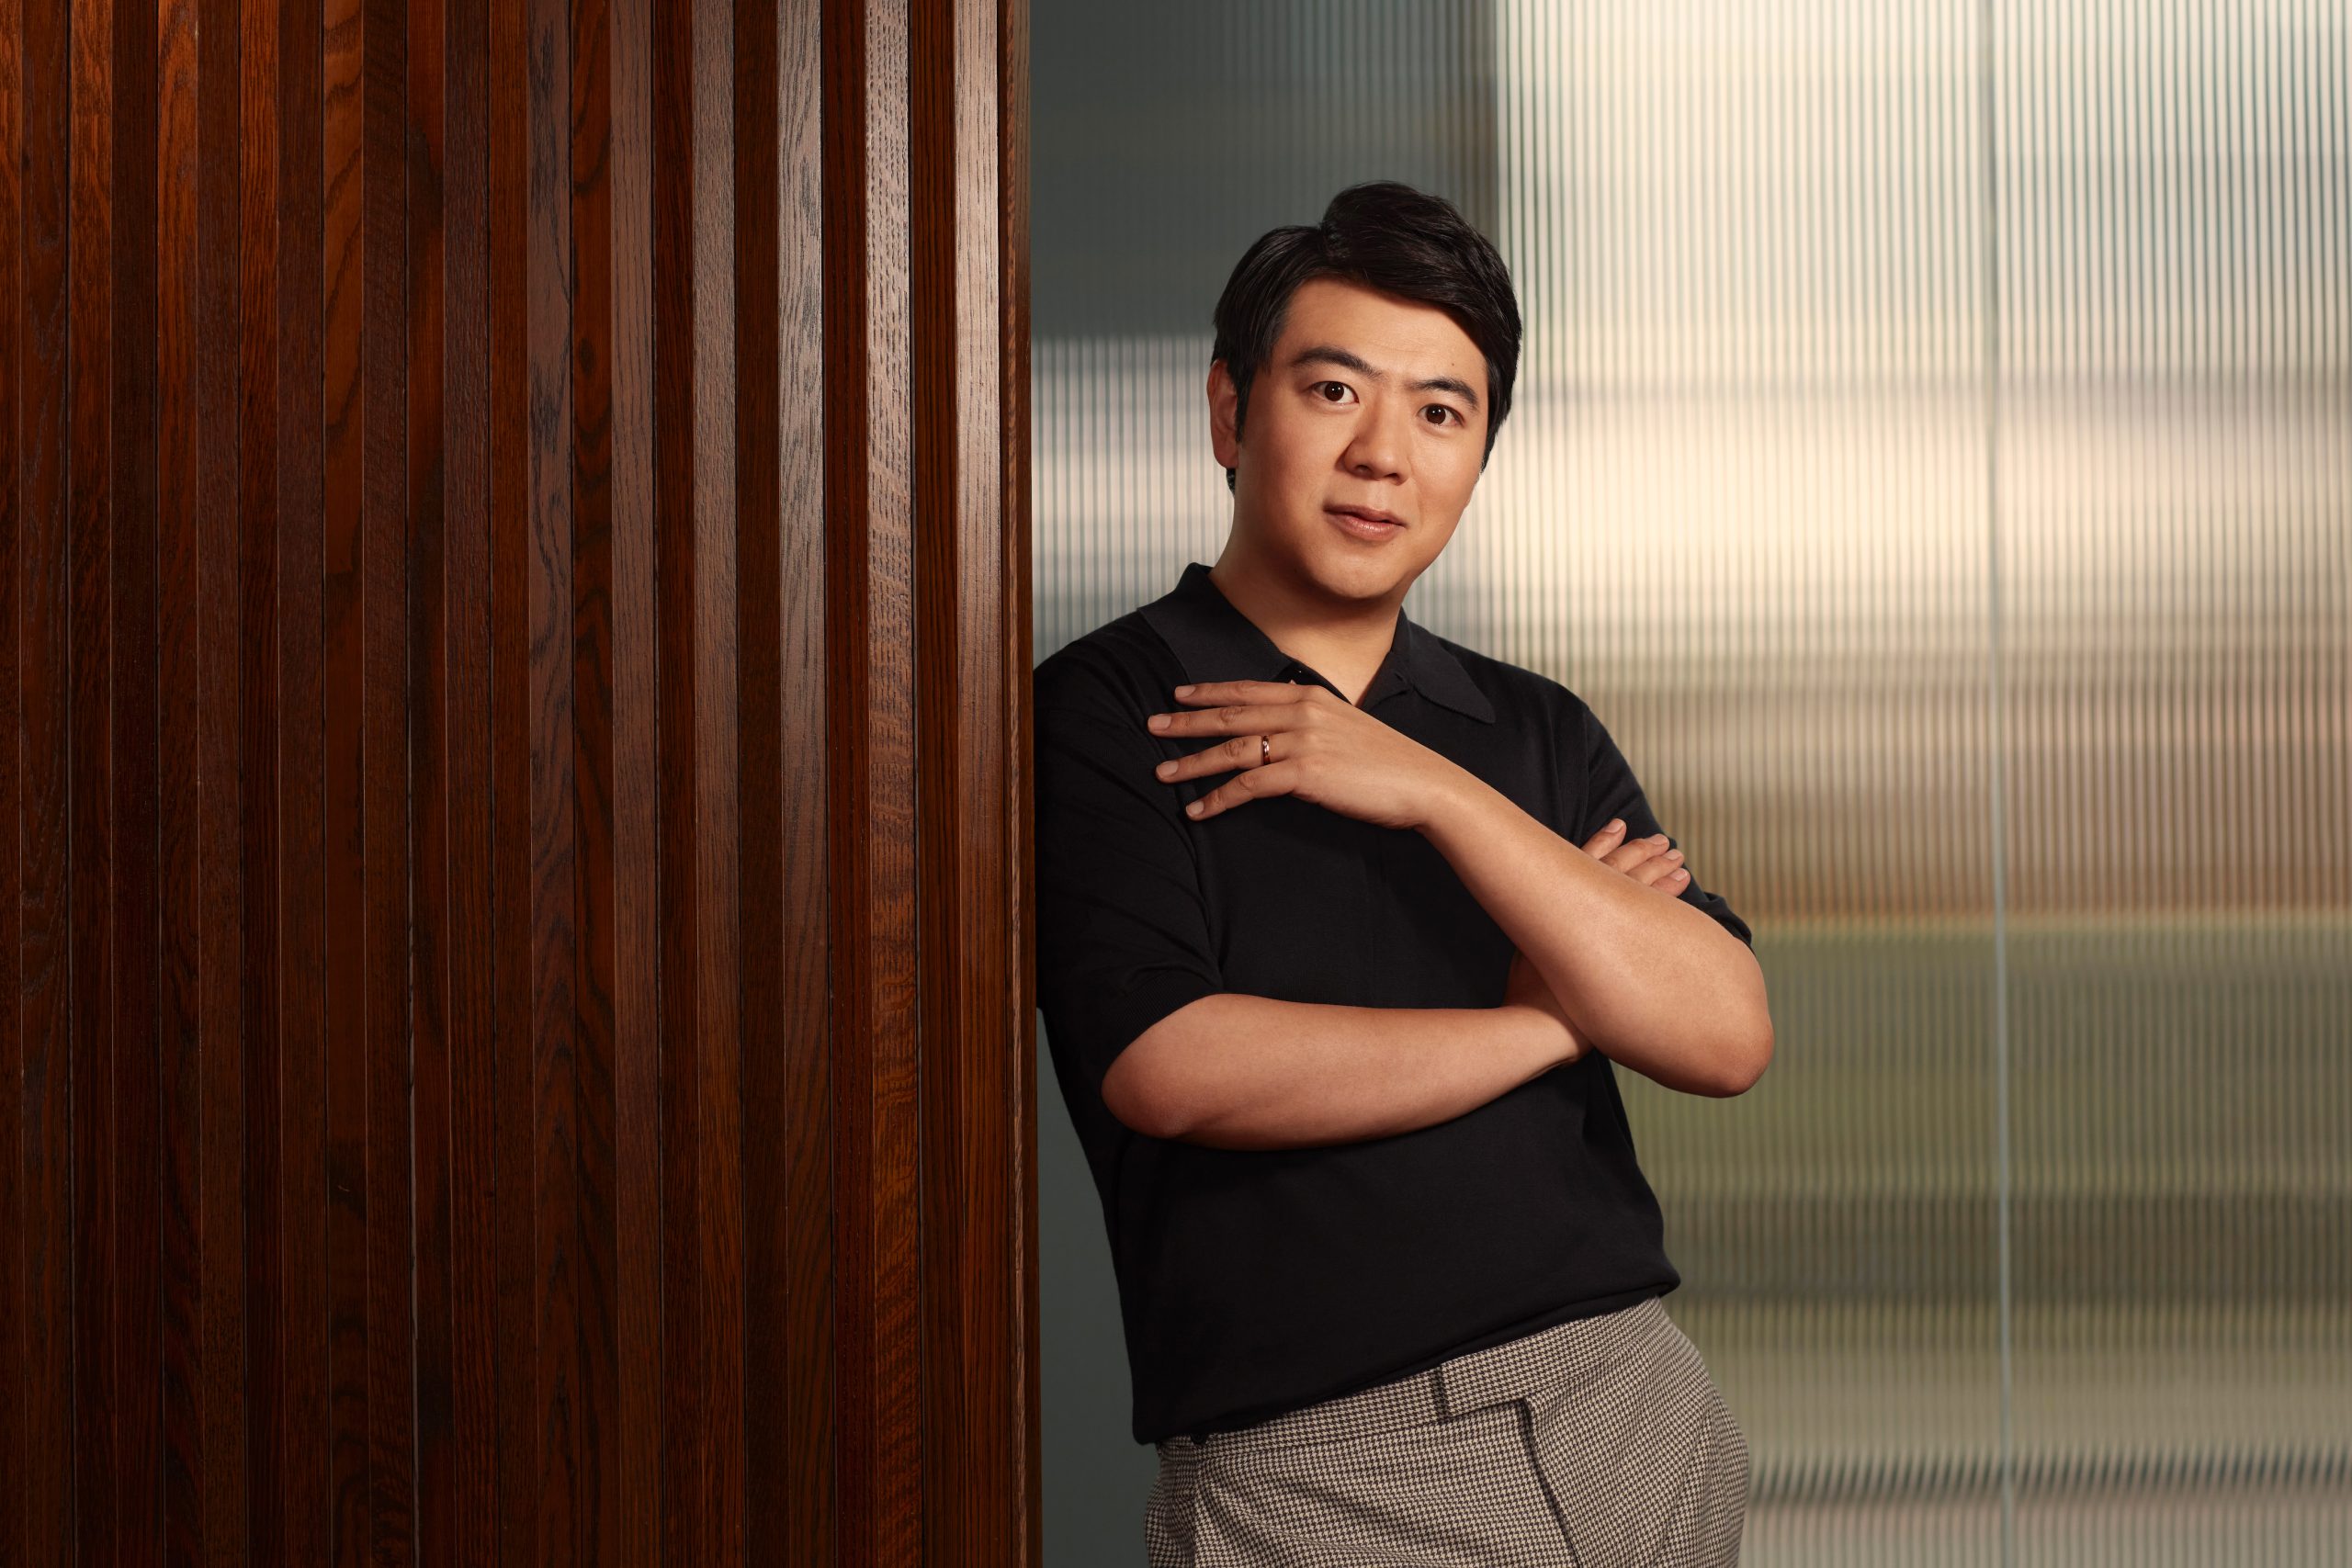 WORLD-RENOWNED CLASSICAL PIANIST LANG LANG TO BE HONORED WITH STAR ON THE HOLLYWOOD WALK OF FAME | FIRST ASIAN PIANIST TO RECEIVE A STAR ON THE ICONIC SIDEWALK